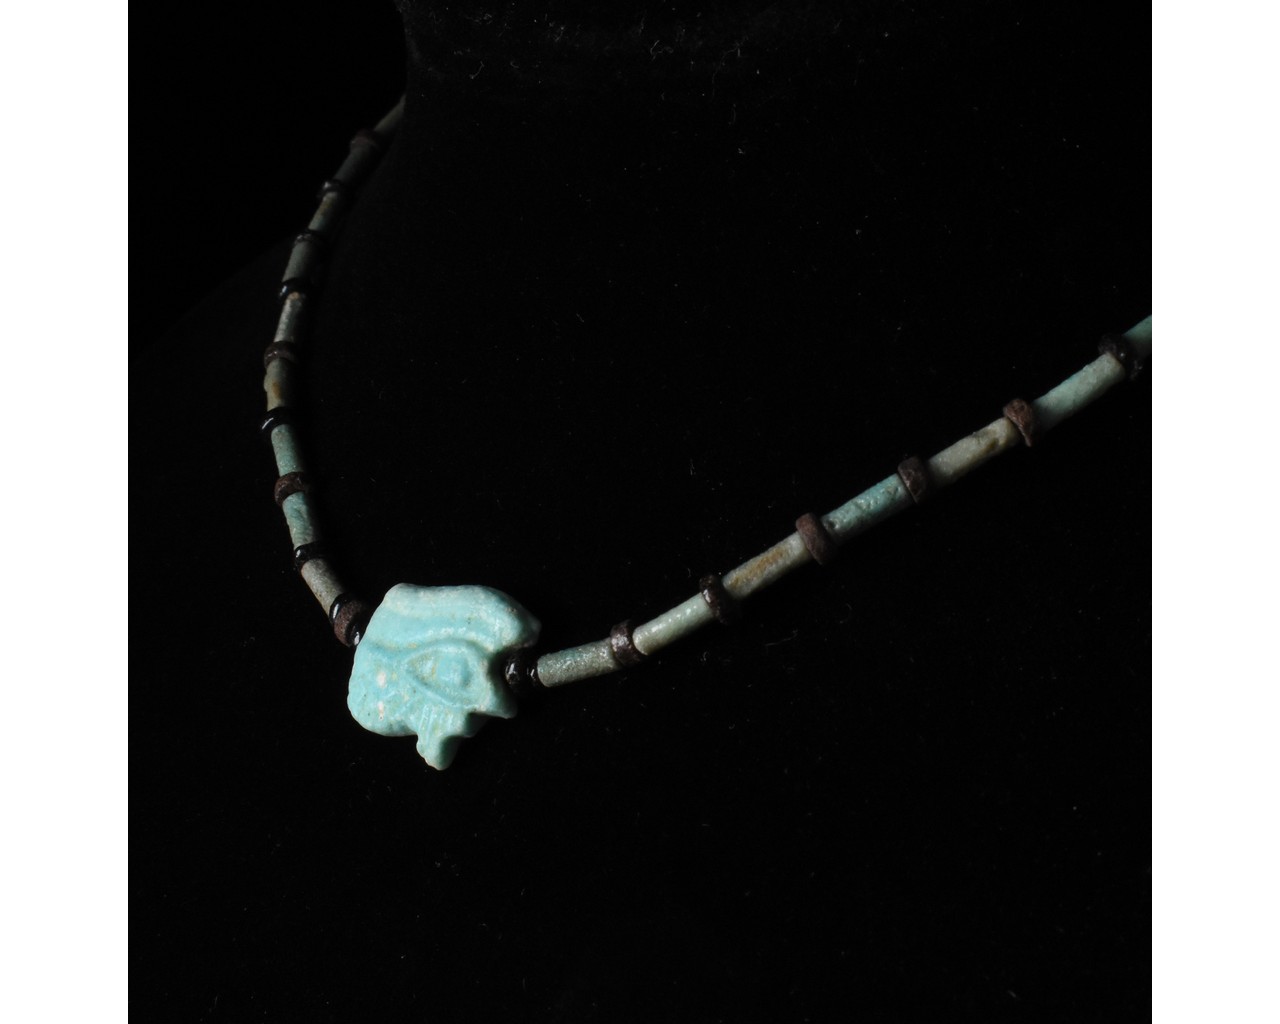 EGYPTIAN FAIENCE NECKLACE WITH EYE OF HORUS AMULET - Image 2 of 3